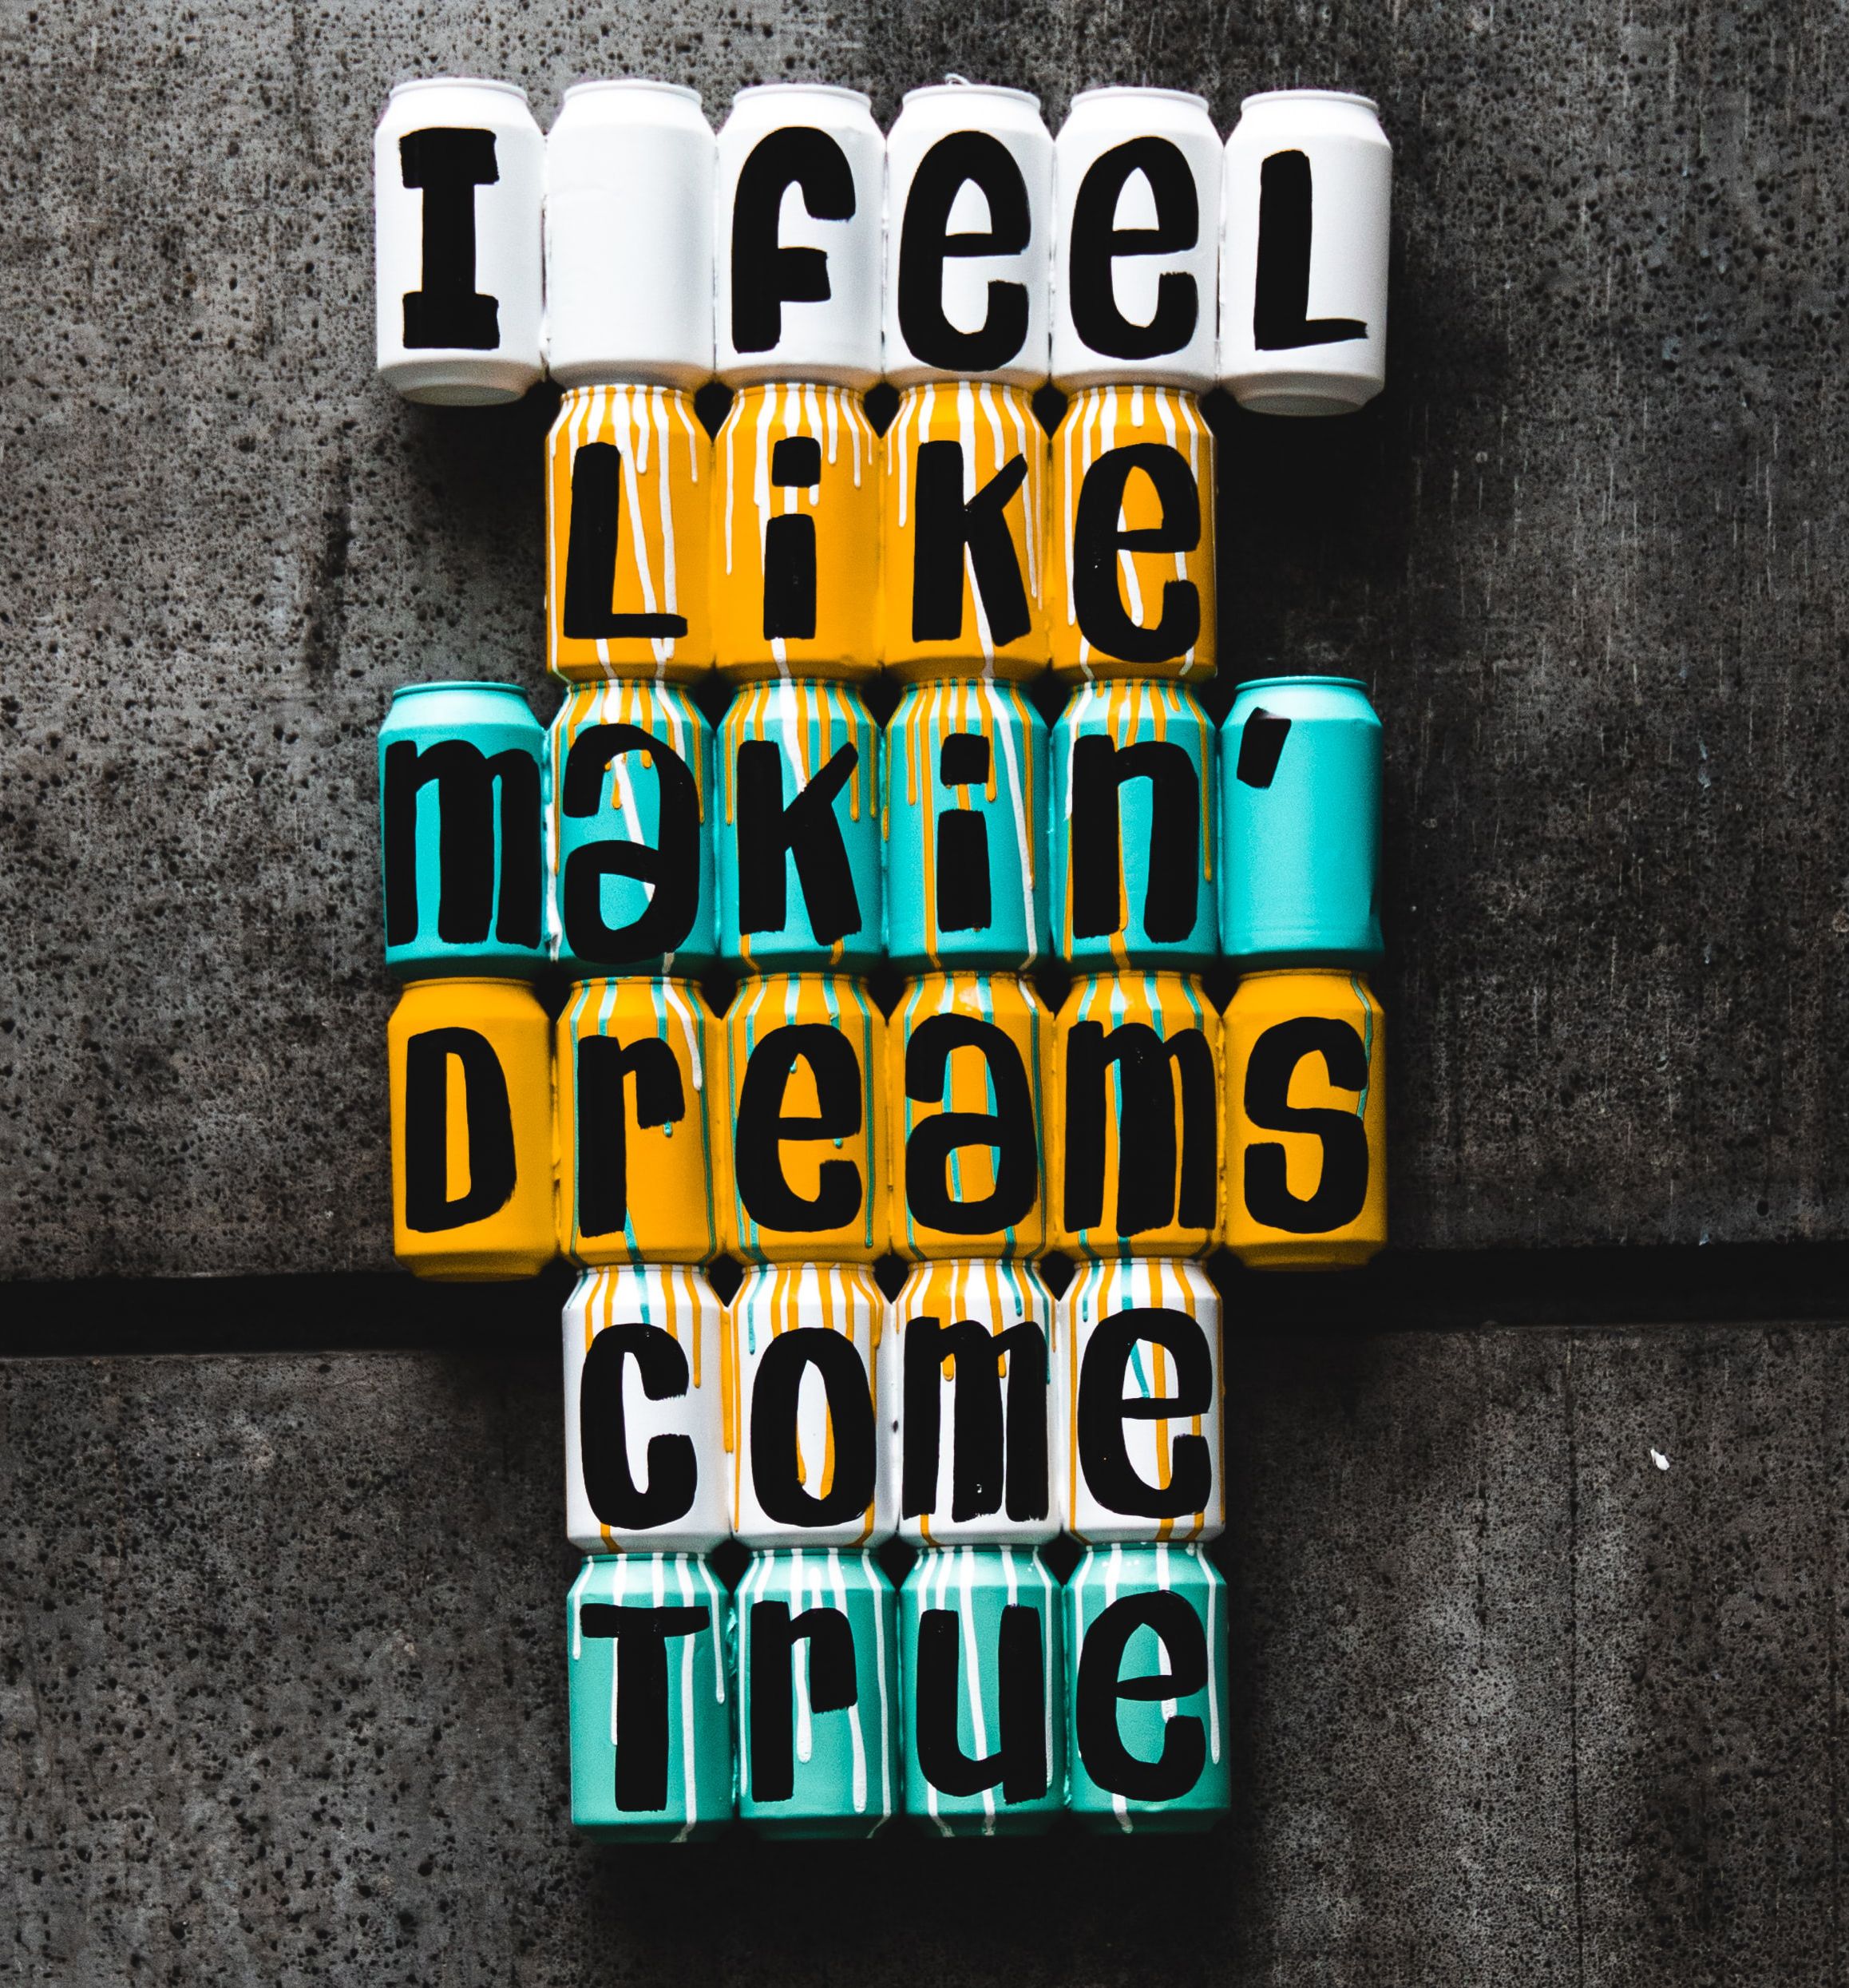 Sprat painted cans with letters spelling out "i feel like makin' dreams come true" in green, white and orange